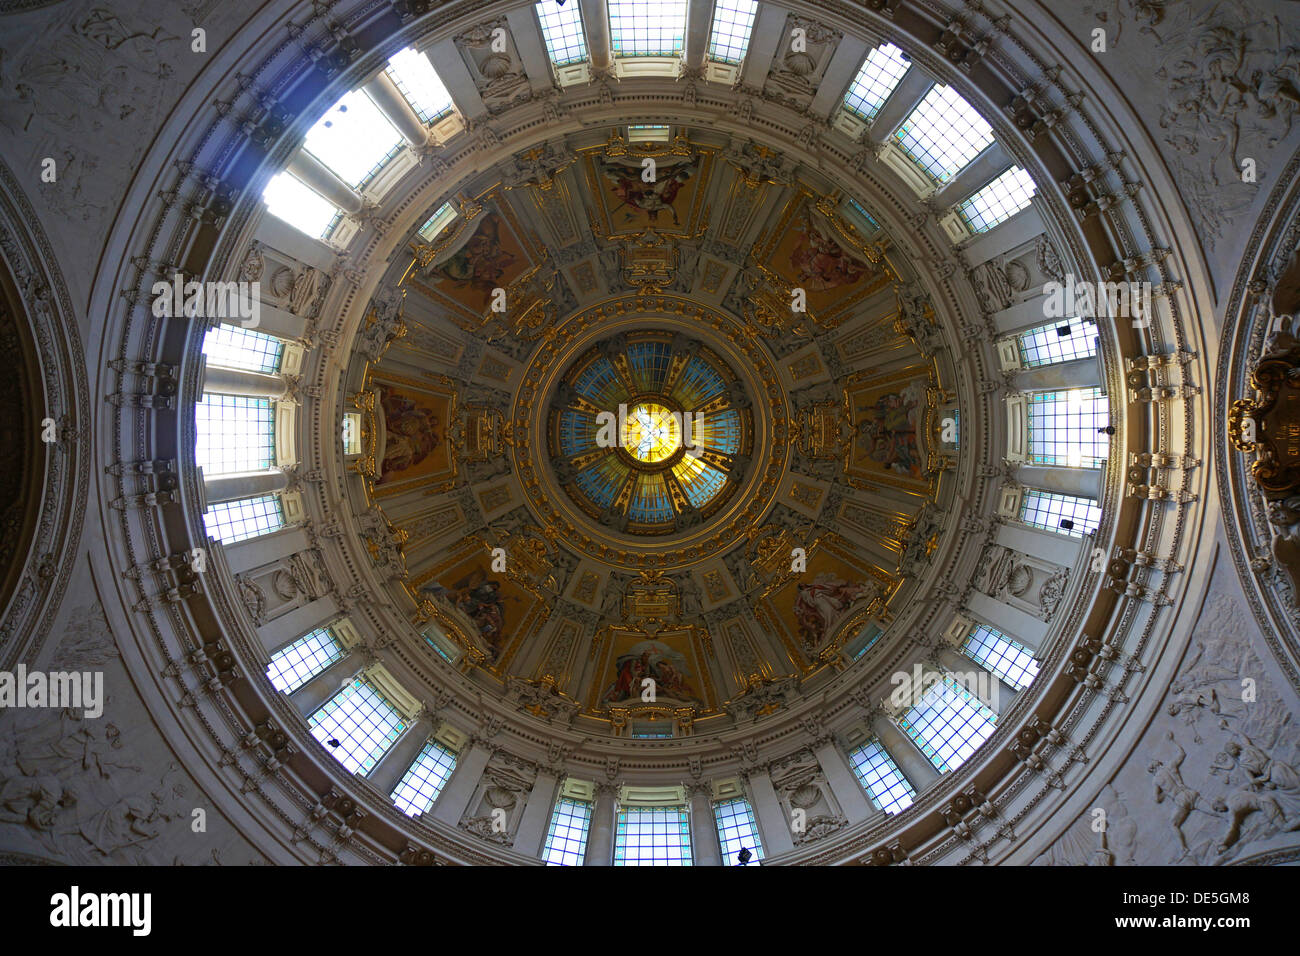 Germany: Inside view of Berlin Cathedral dome Stock Photo